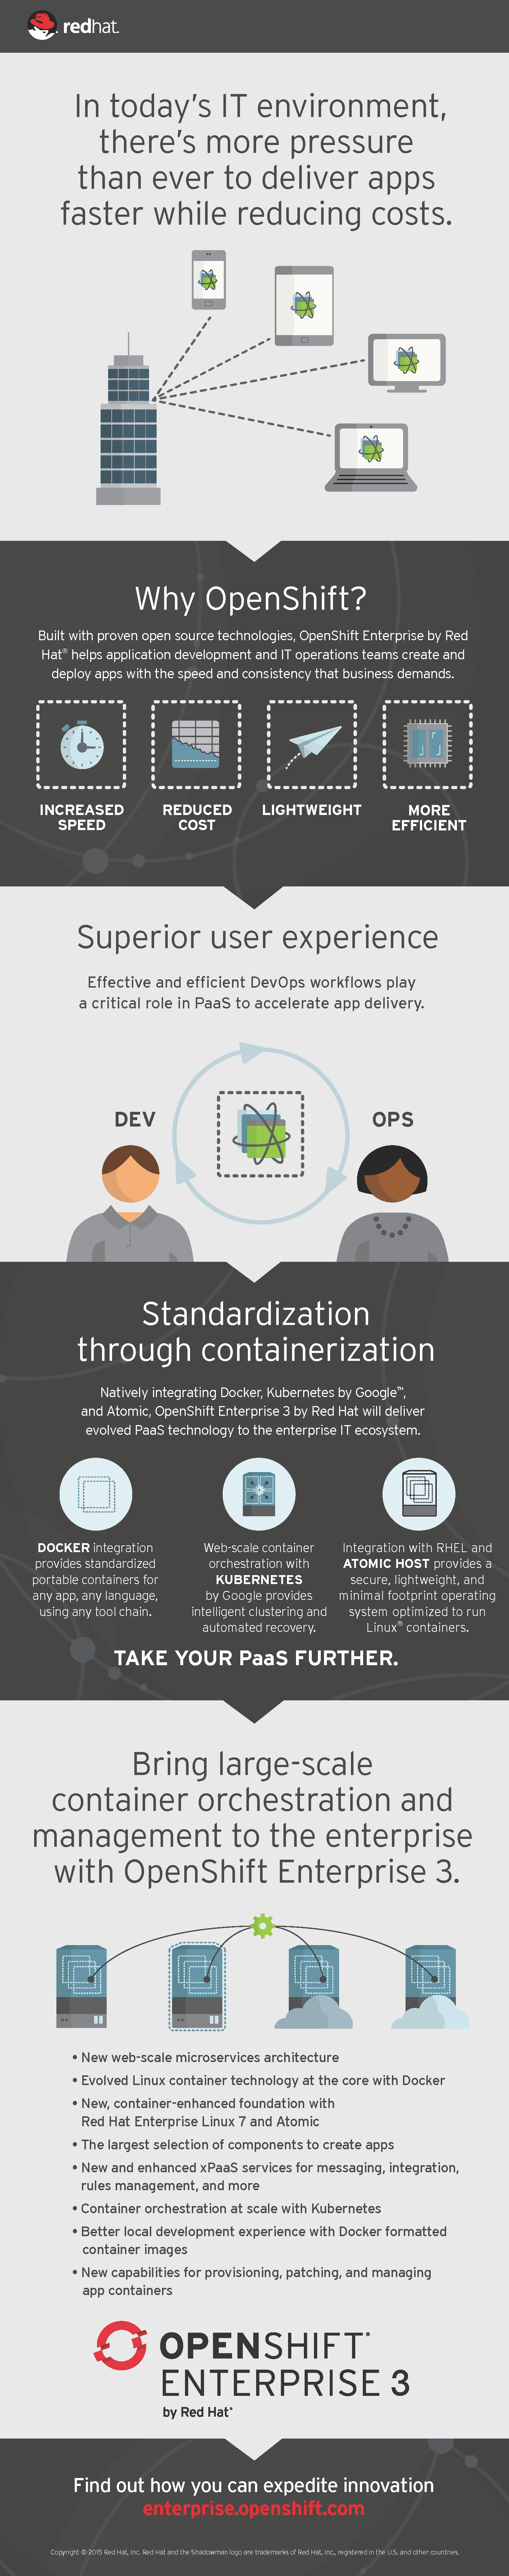 Why Red Hat OpenShift Infographic